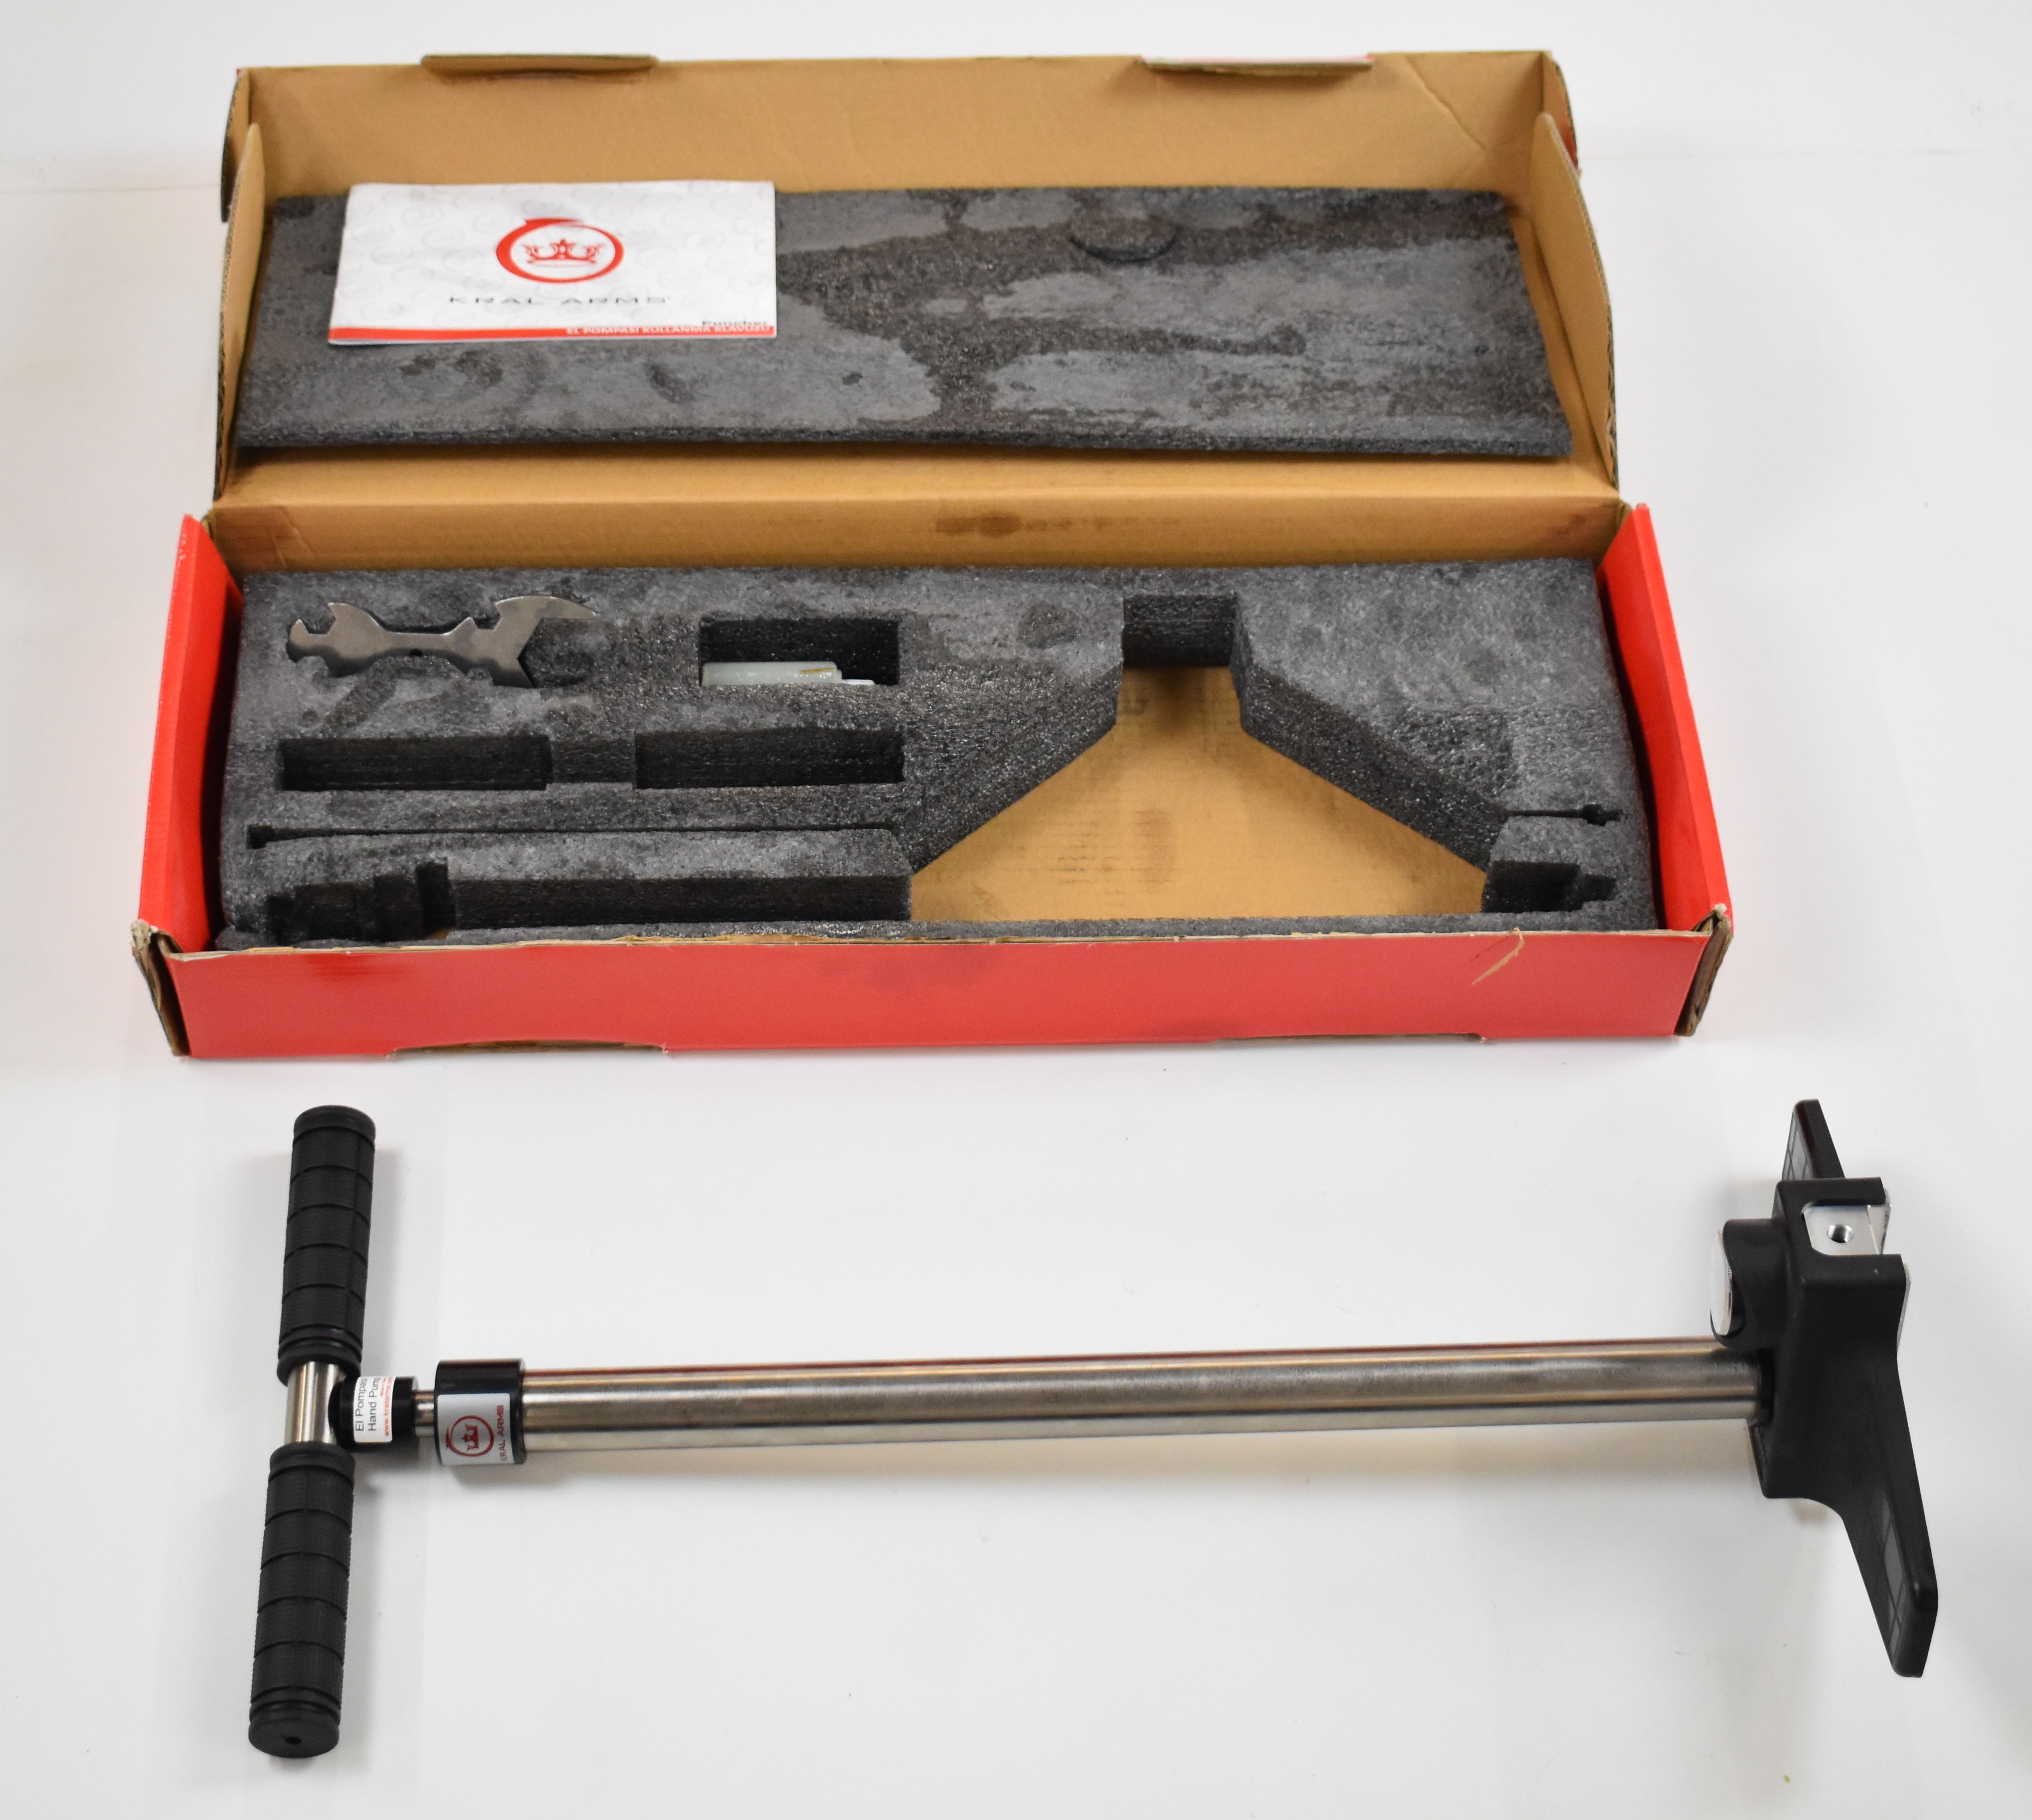 Kral Arms PCP air rifle or pistol pump, in original box with accessories and instructions.